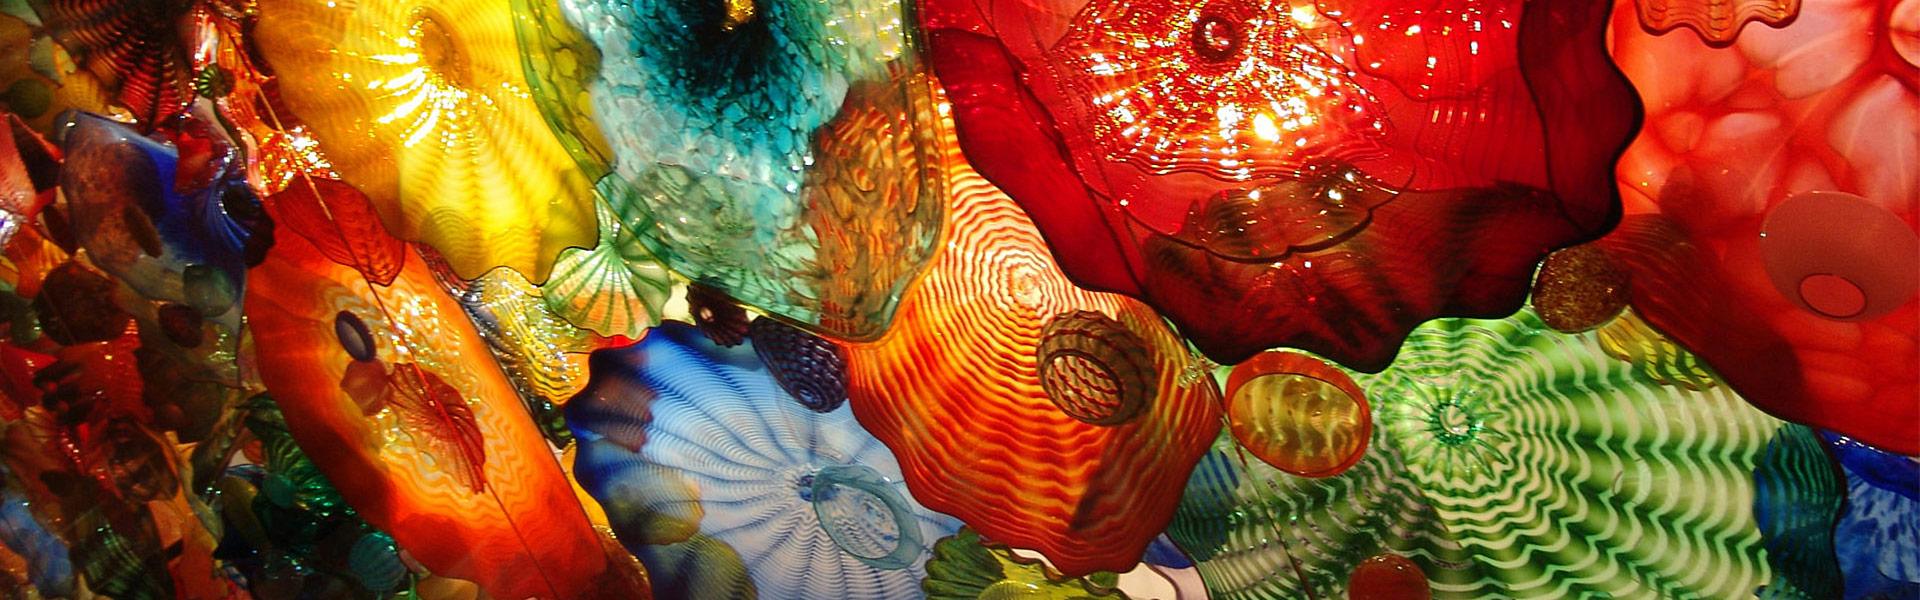 dale chihuly glass